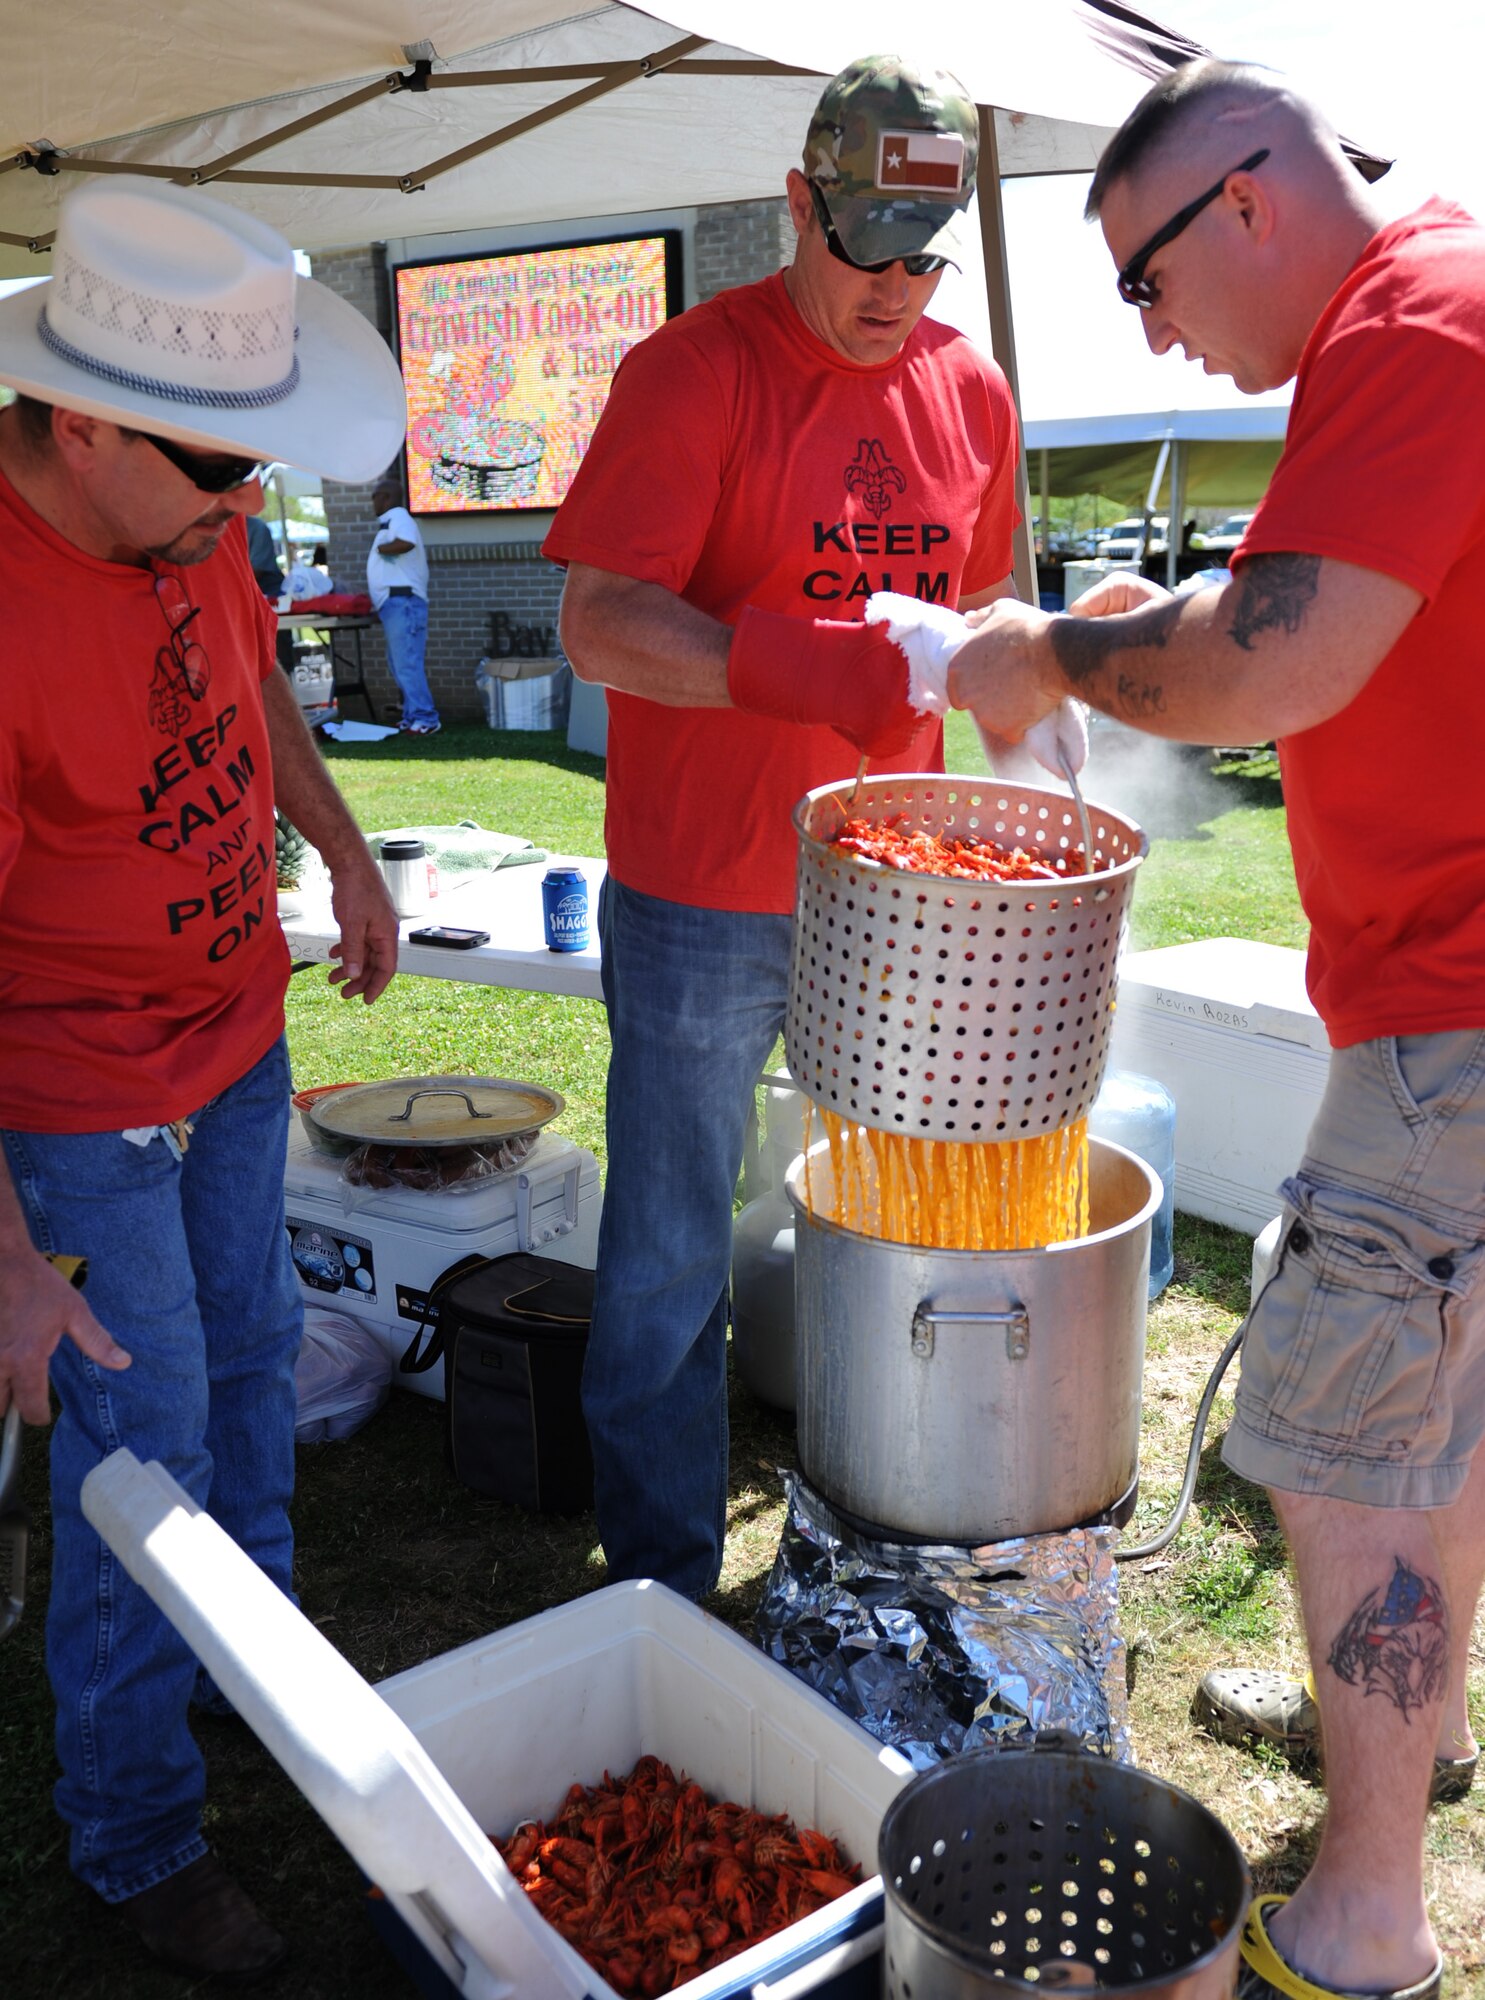 The “Claws Down Tails Up” team members, Kevin Rozas, father of Staff Sgt. Kevin Rozas, 81st Security Forces Squadron patrolman; Master Sgt. Aaron Gaddis, 81st SFS antiterrorism officer; and Staff Sgt. Jared Miller, 81st SFS combat arms NCO in charge, lift freshly boiled crawfish from a pot during the 4th Annual Bay Breeze Crawfish Cook-Off at the Bay Breeze Event Center April 8, 2016, Keesler Air Force Base, Miss. The “Bug Smugglers” won the cook-off and decided to gift the trophy and the prize to the second place team, “Kajun Perfection”. “Kajun Perfection” will receive a free entry into the 24th Annual Mississippi Coast Coliseum Crawfish Festival Cook-Off. (U.S. Air Force photo by Kemberly Groue)